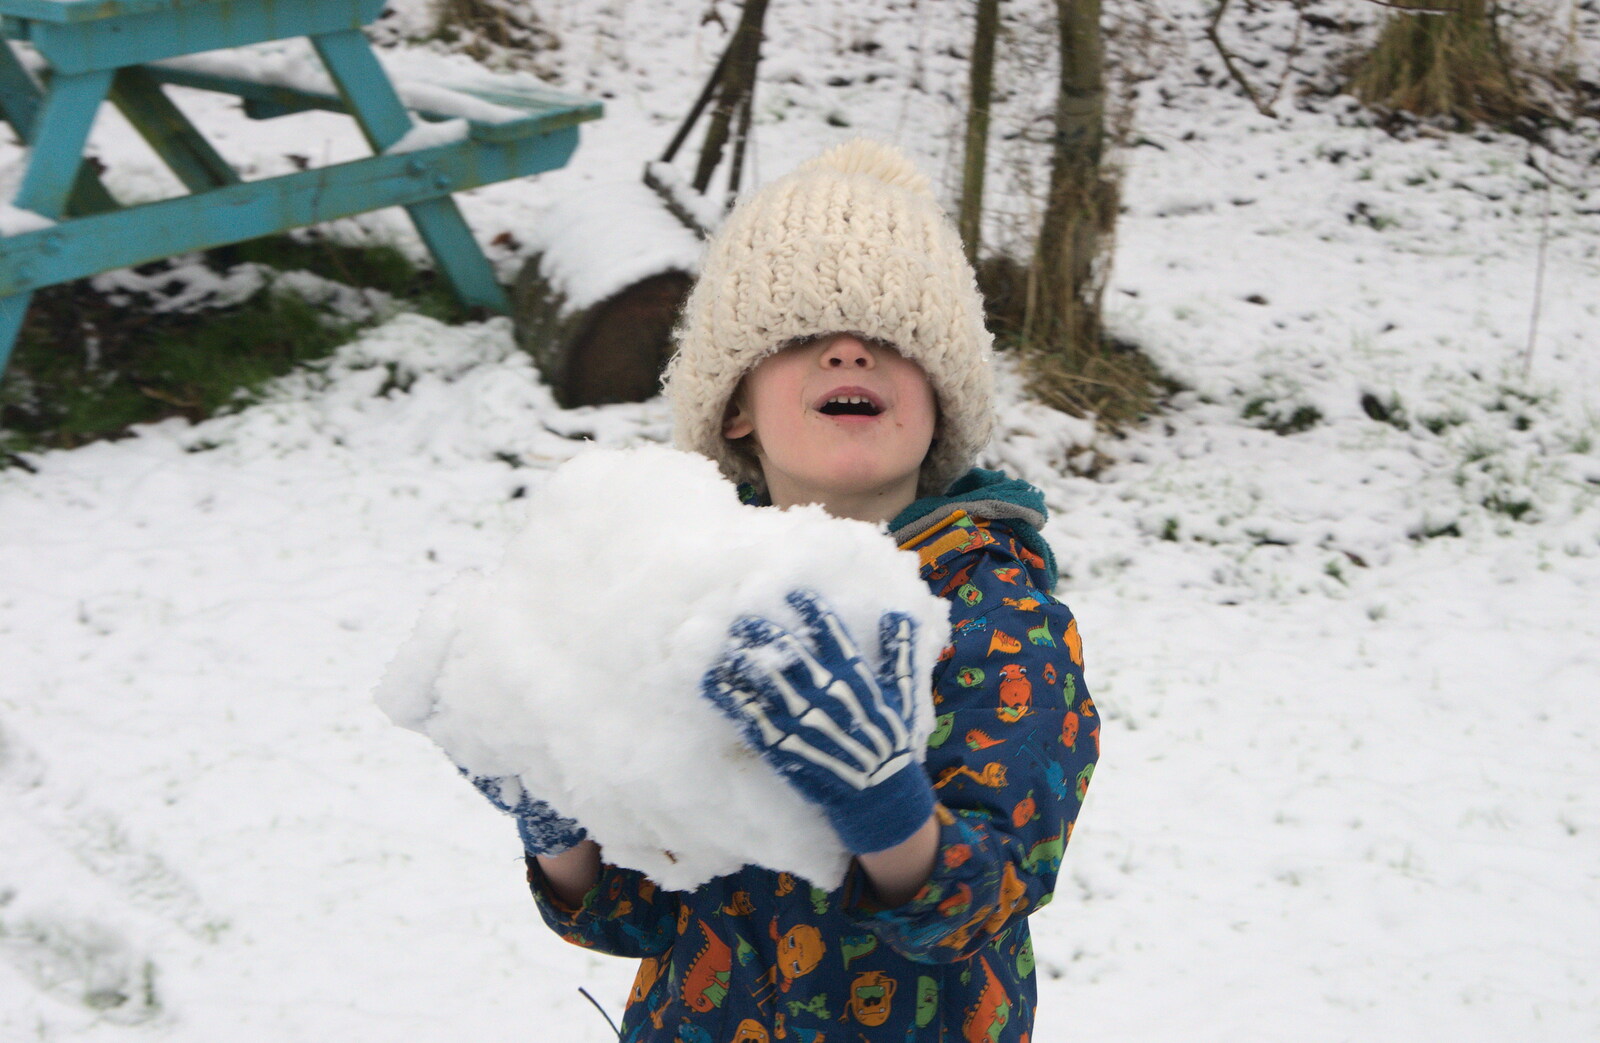 Harry's got a big snowball from A Snowy Day, Brome, Suffolk - 12th February 2017